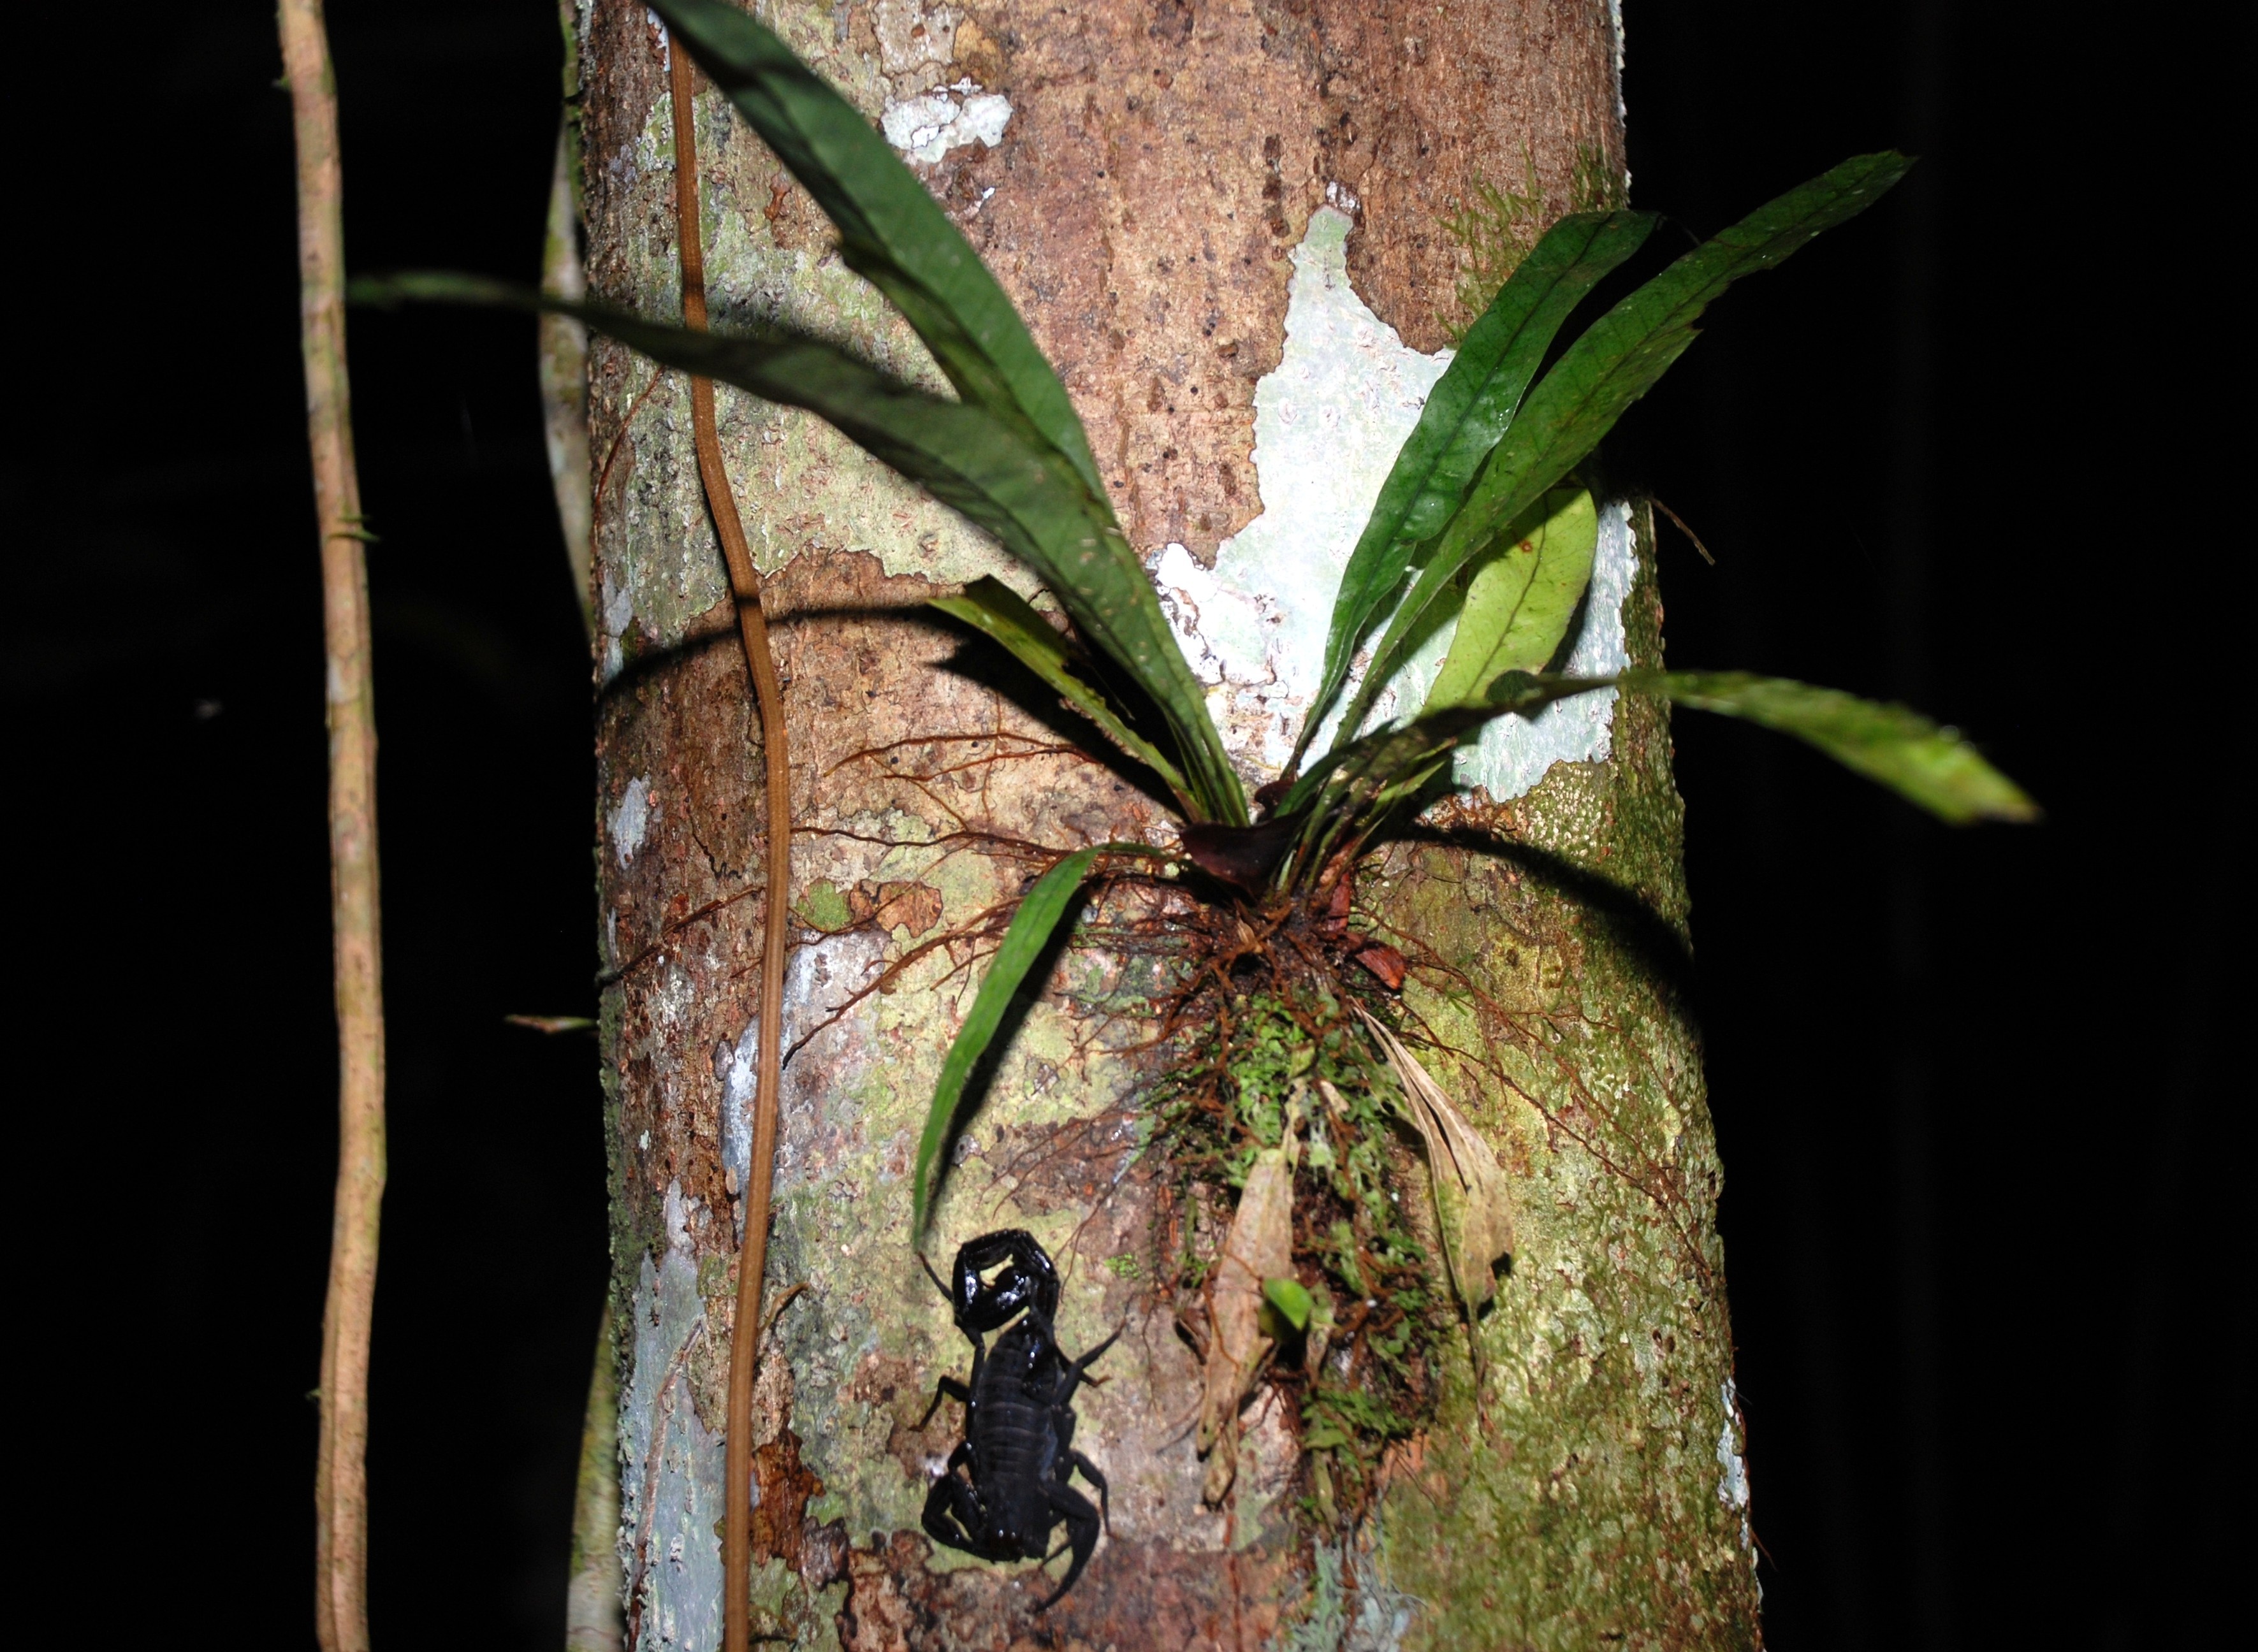 black scorpion and bromeliad during night jungle hike in amazon rainforest